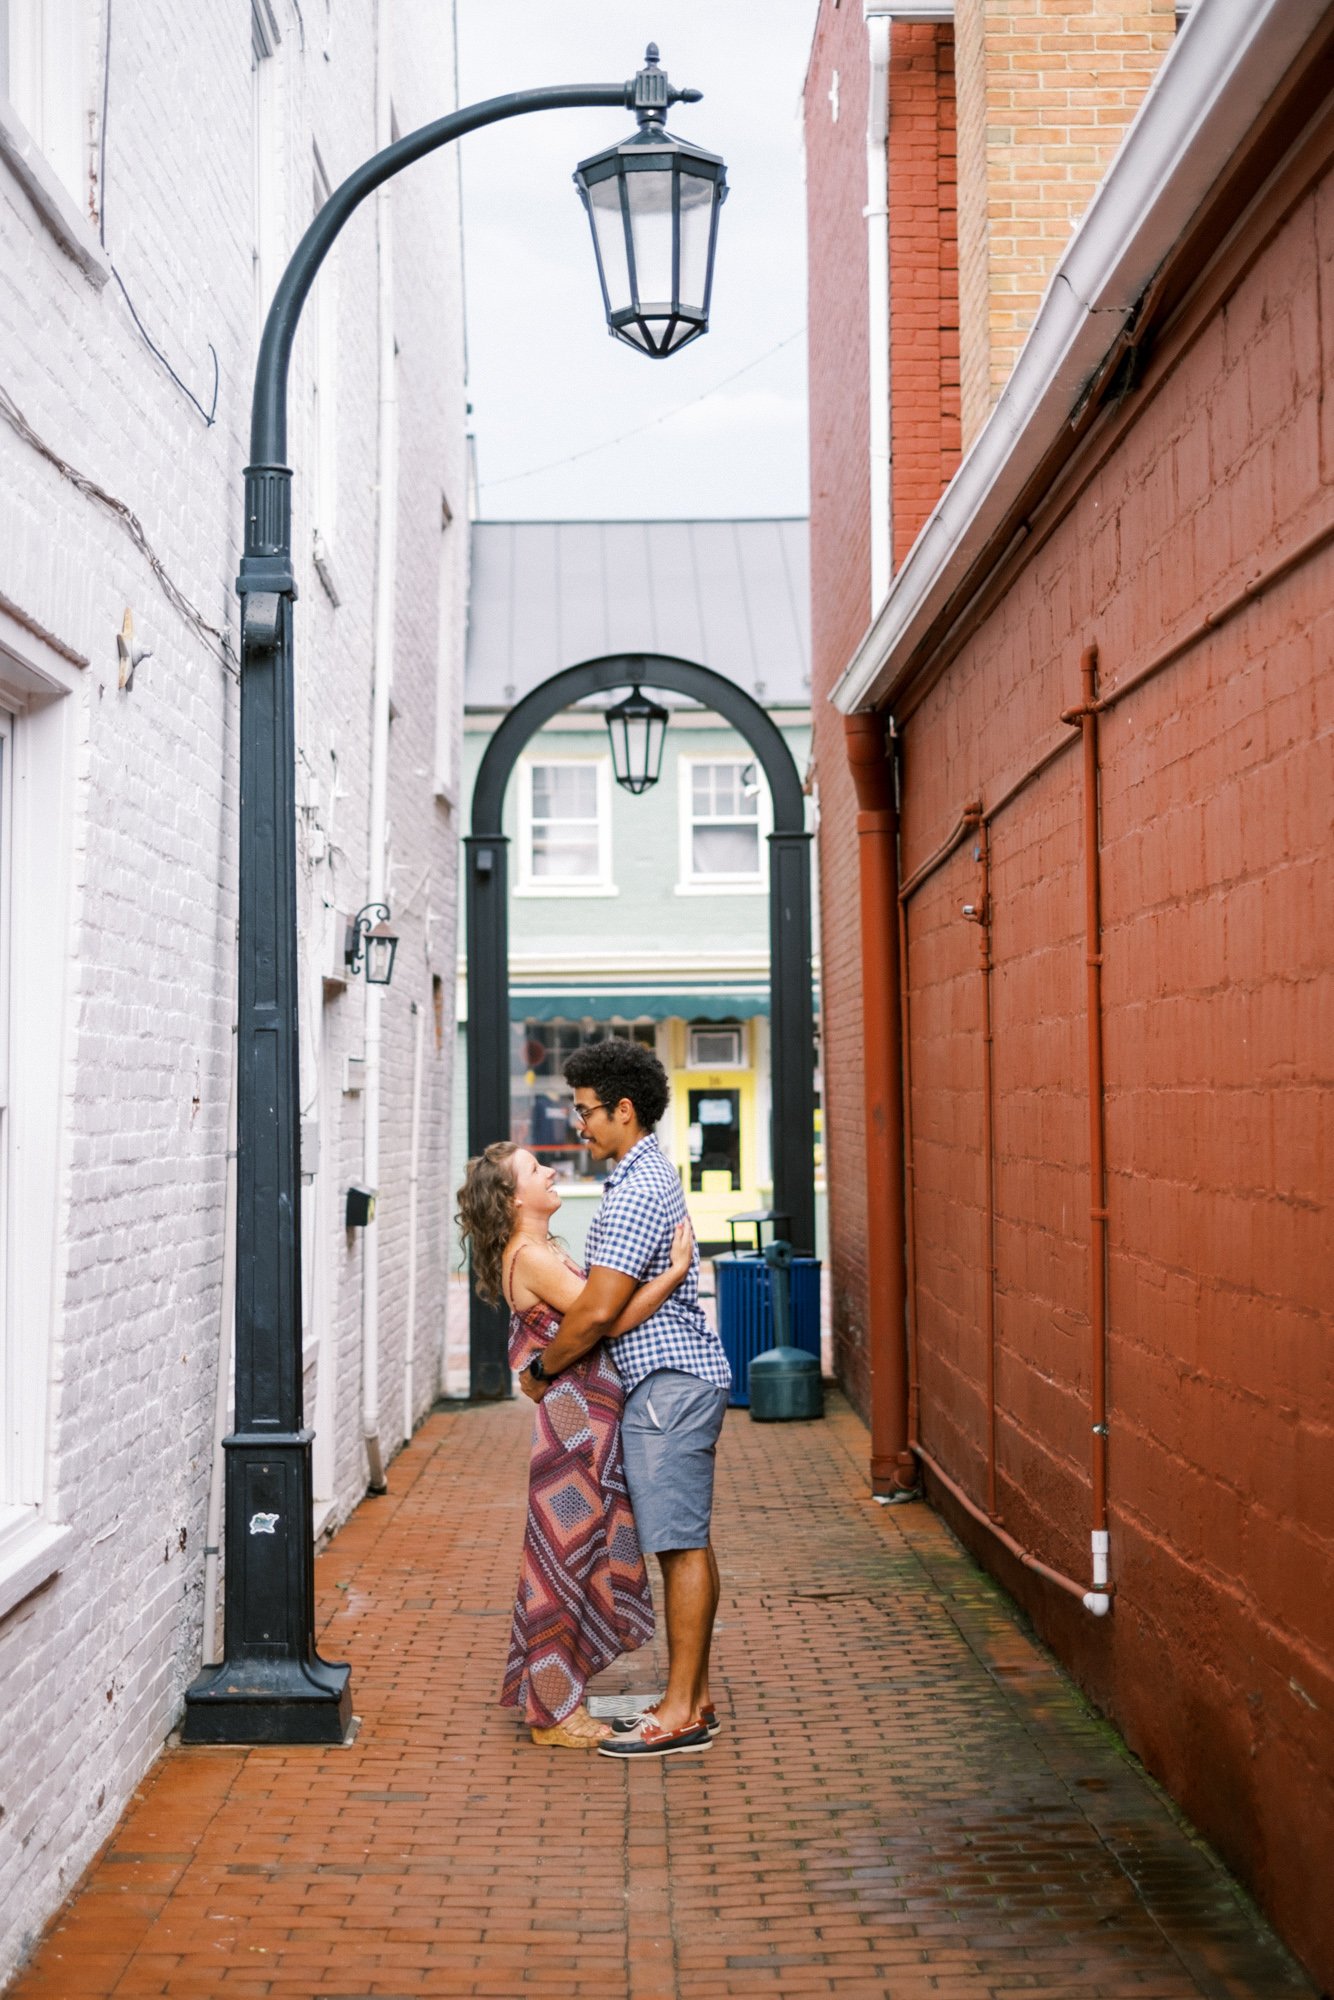 downtown leesburg engagement session couple in alleyway under lamp post